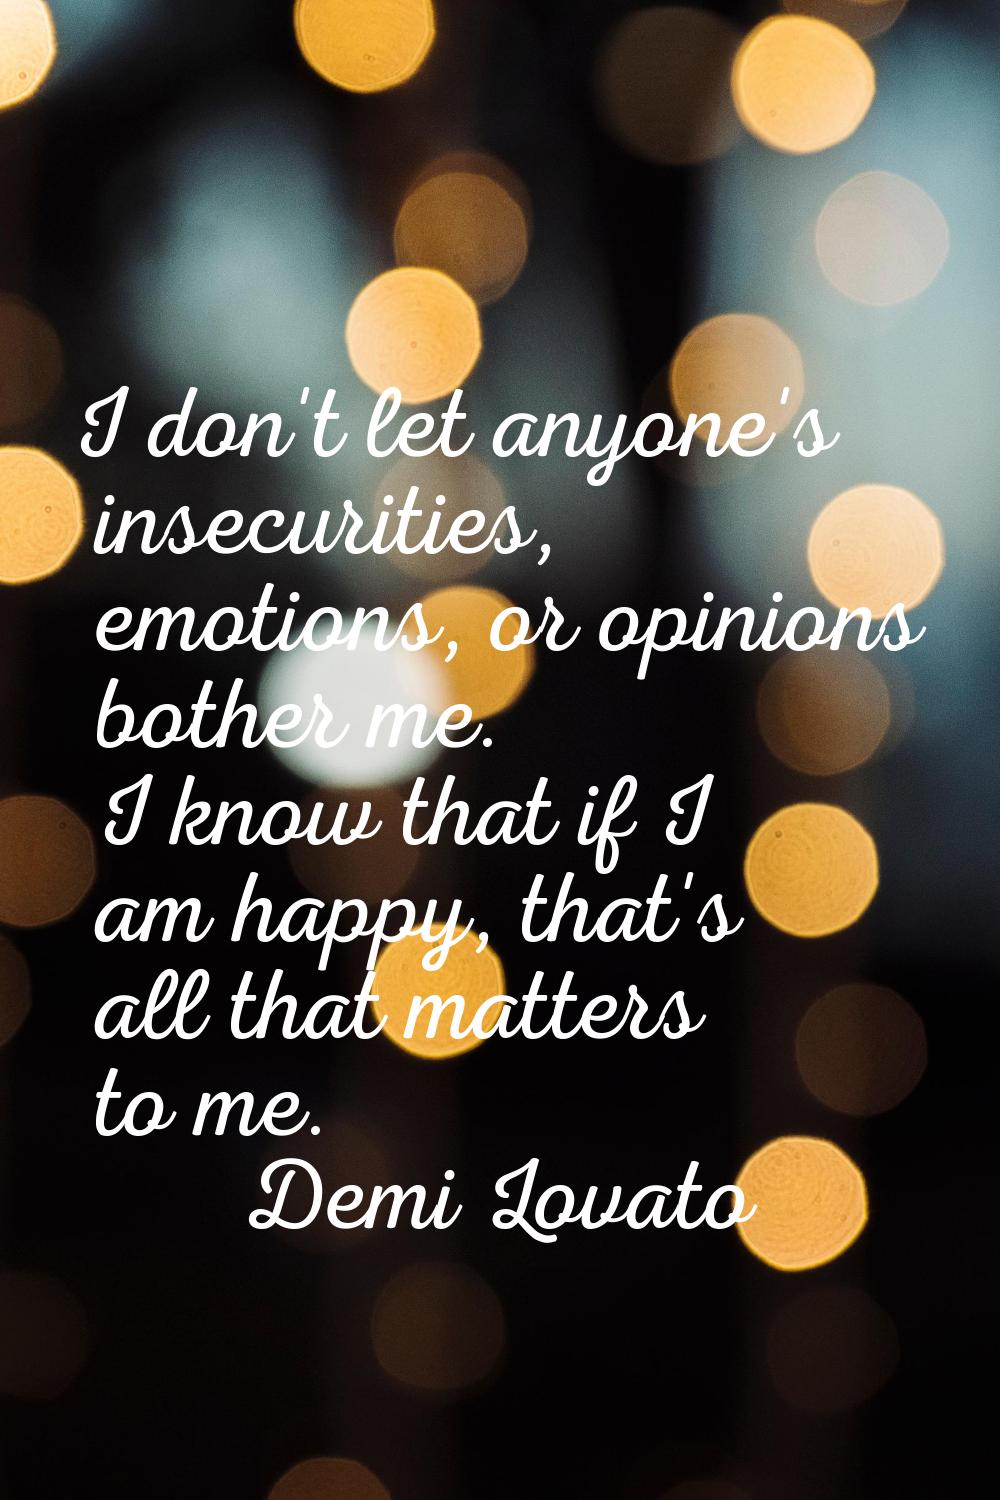 I don't let anyone's insecurities, emotions, or opinions bother me. I know that if I am happy, that